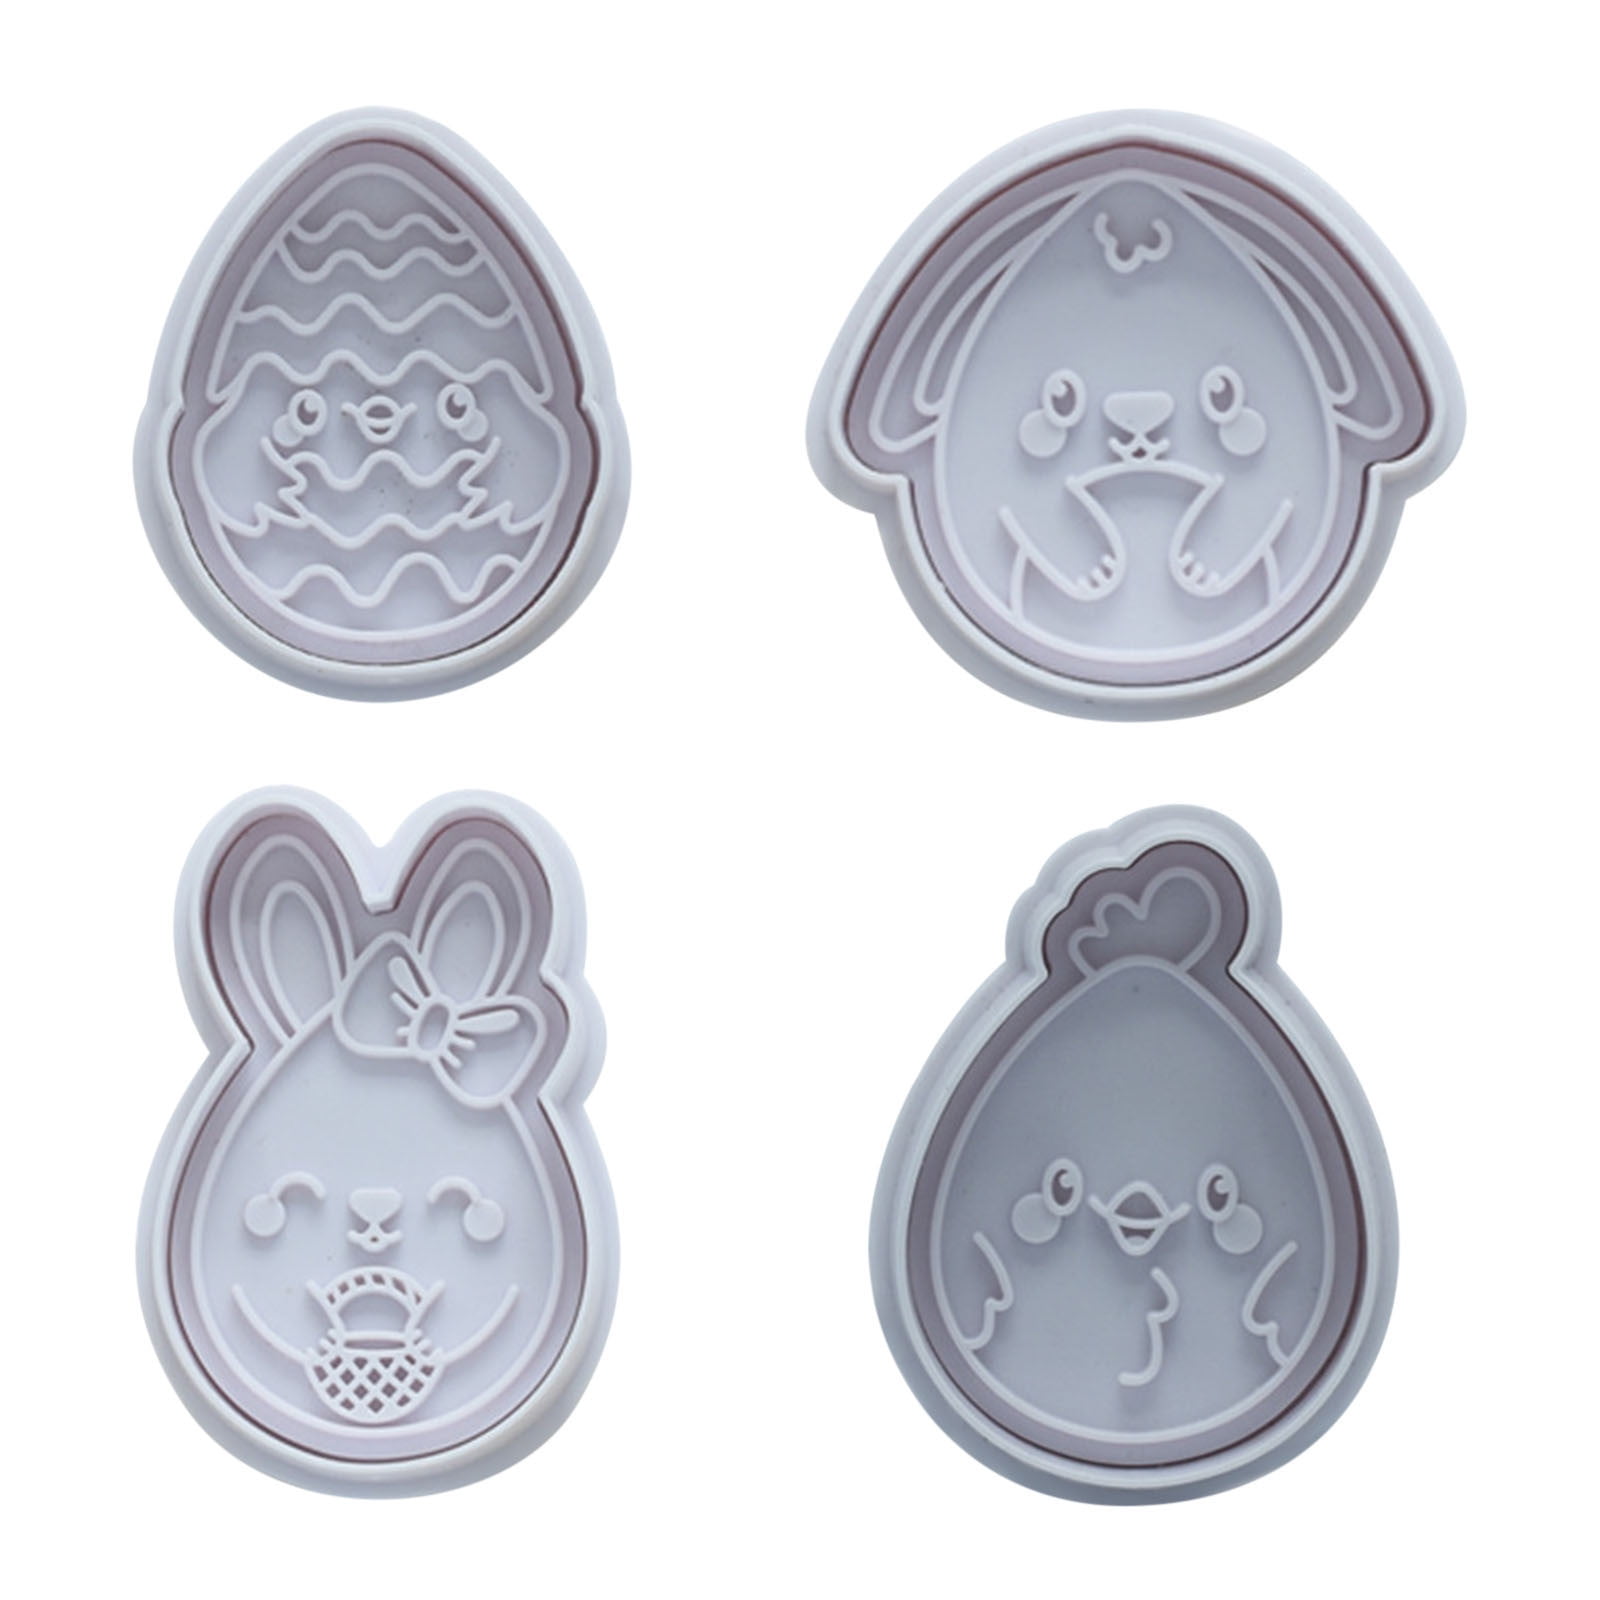 DYTTDG School Supplies Set Easter Series Silicone Fondant Cake